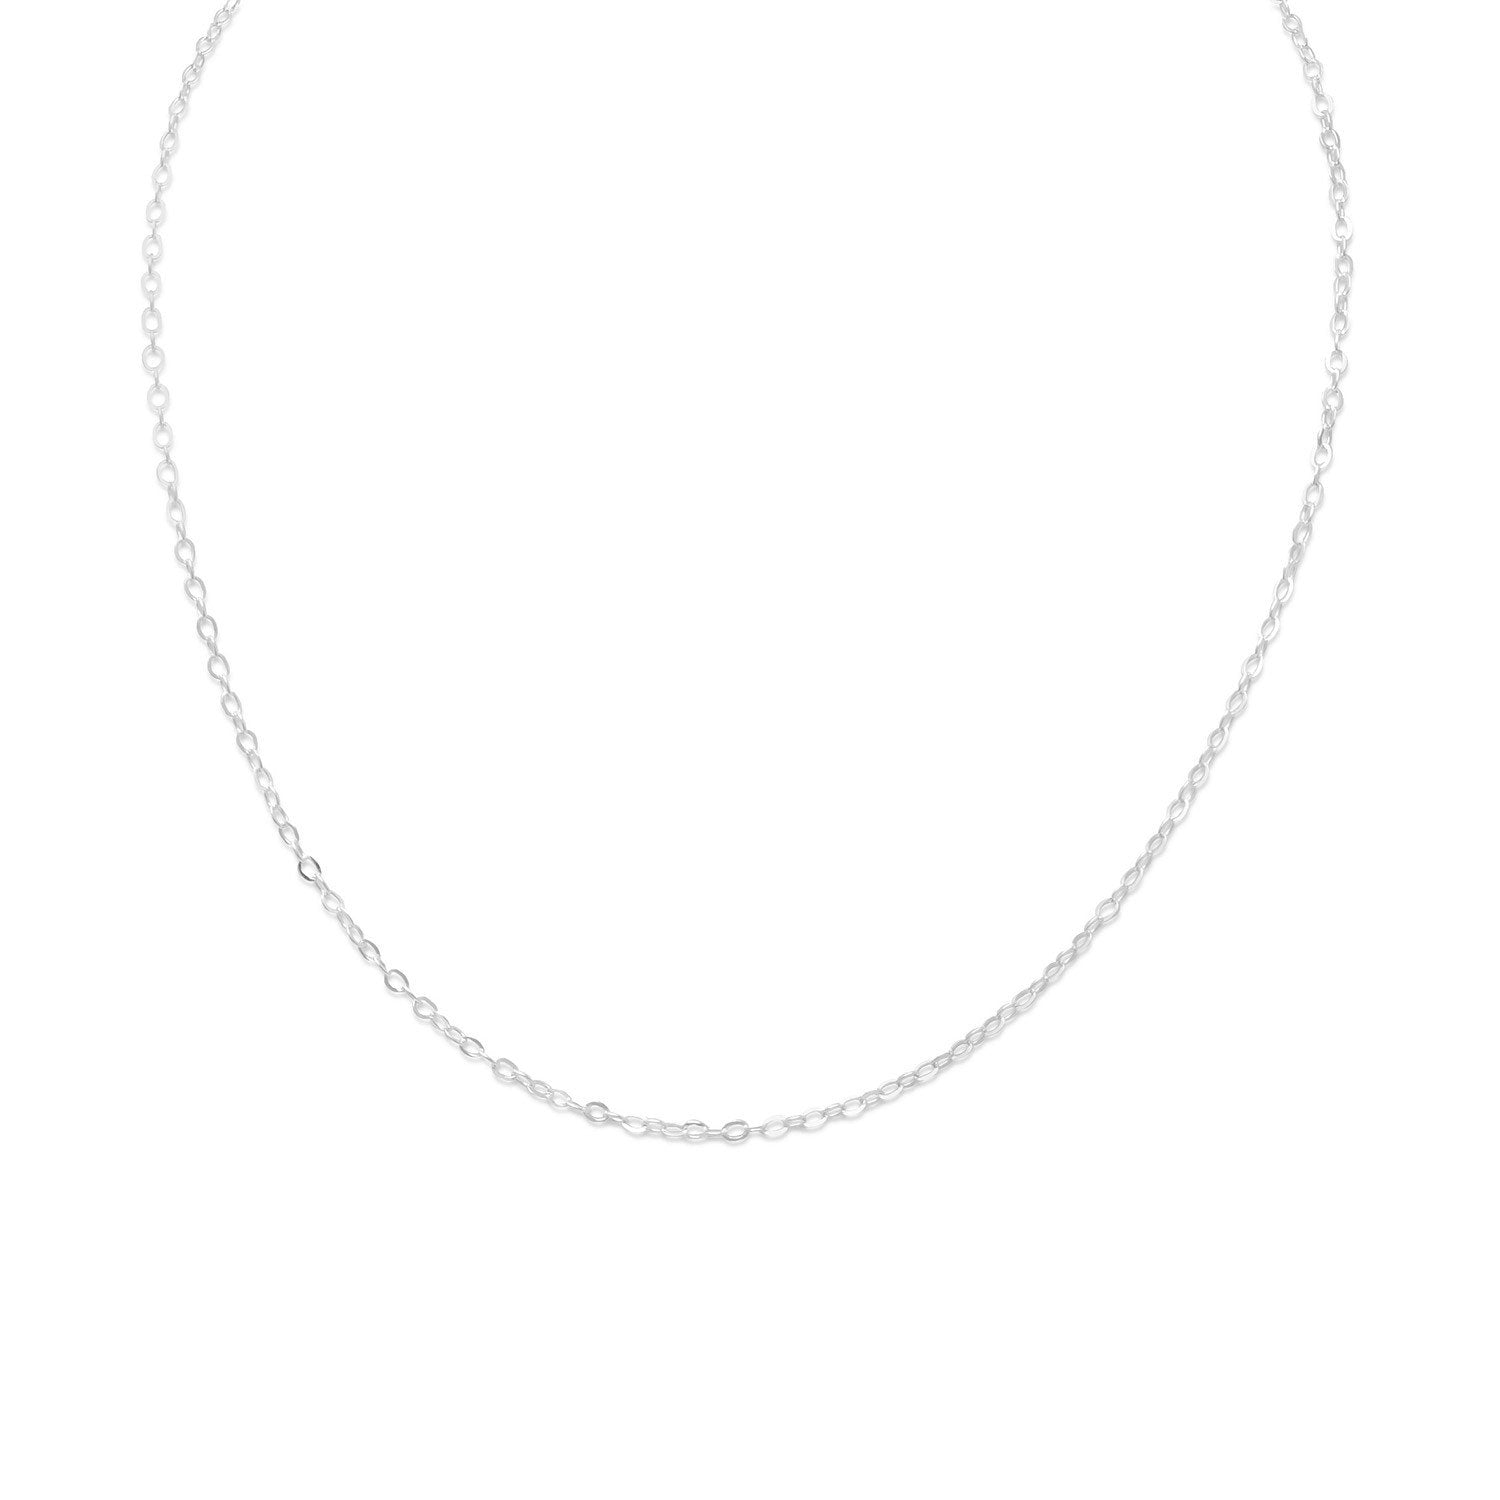 13"+1" Extension Cable Chain Necklace - Joyeria Lady